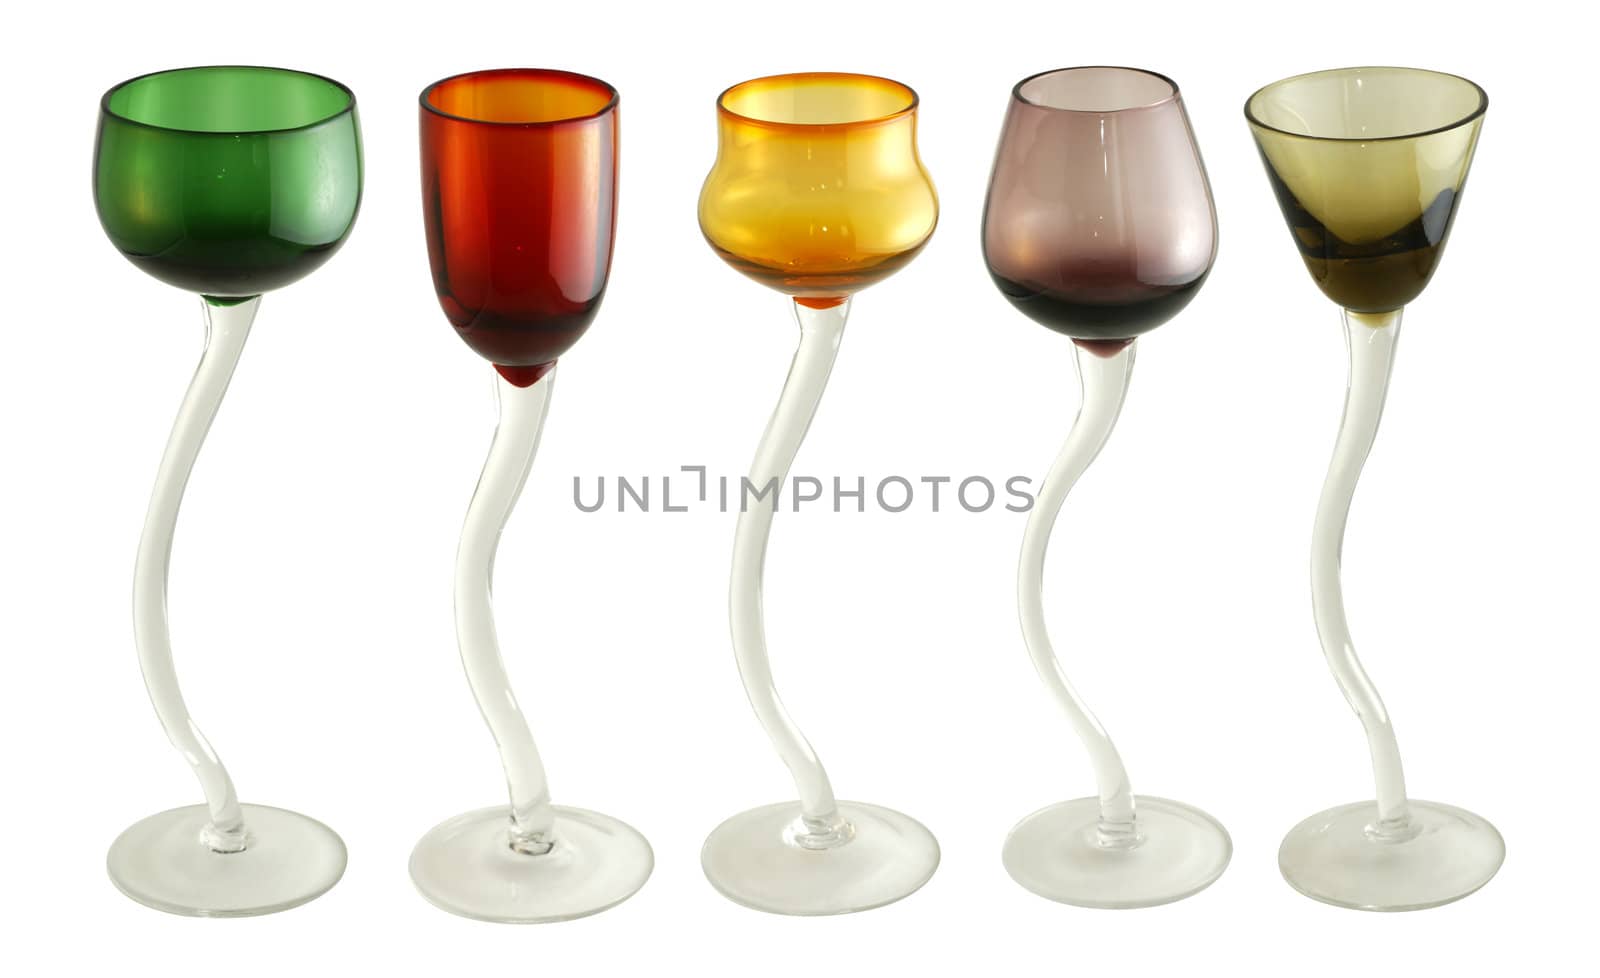 Colored cocktail glasses by Mirage3